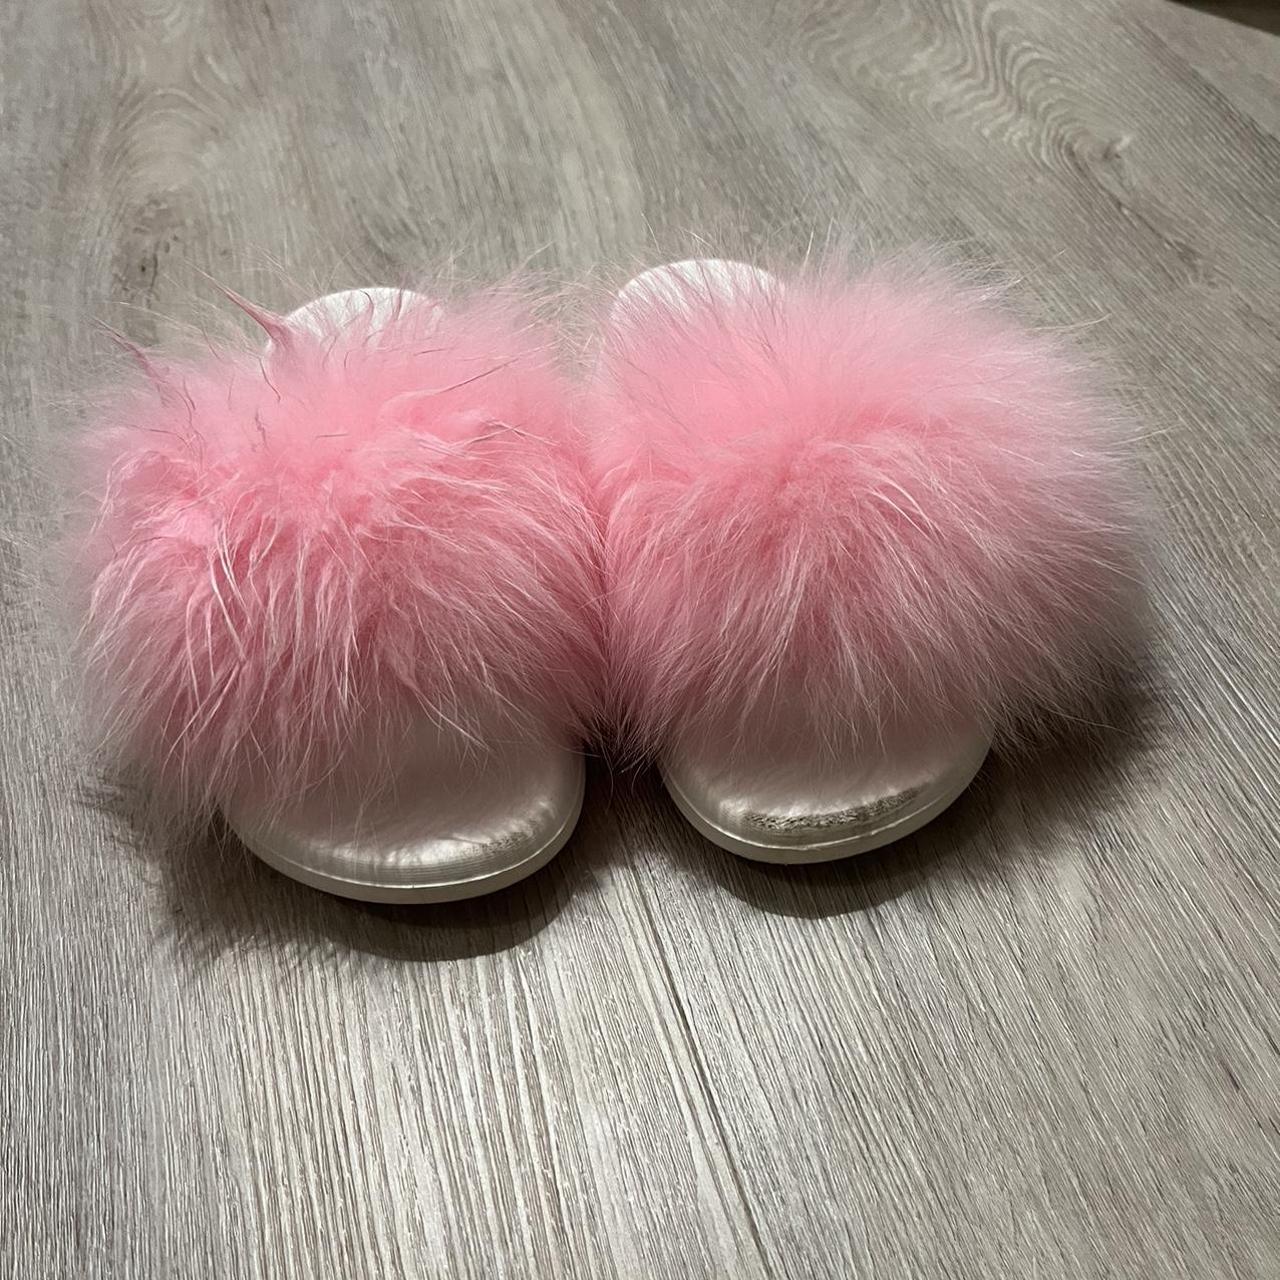 Fuzzy Slides in “LV” Tan or Pink Print